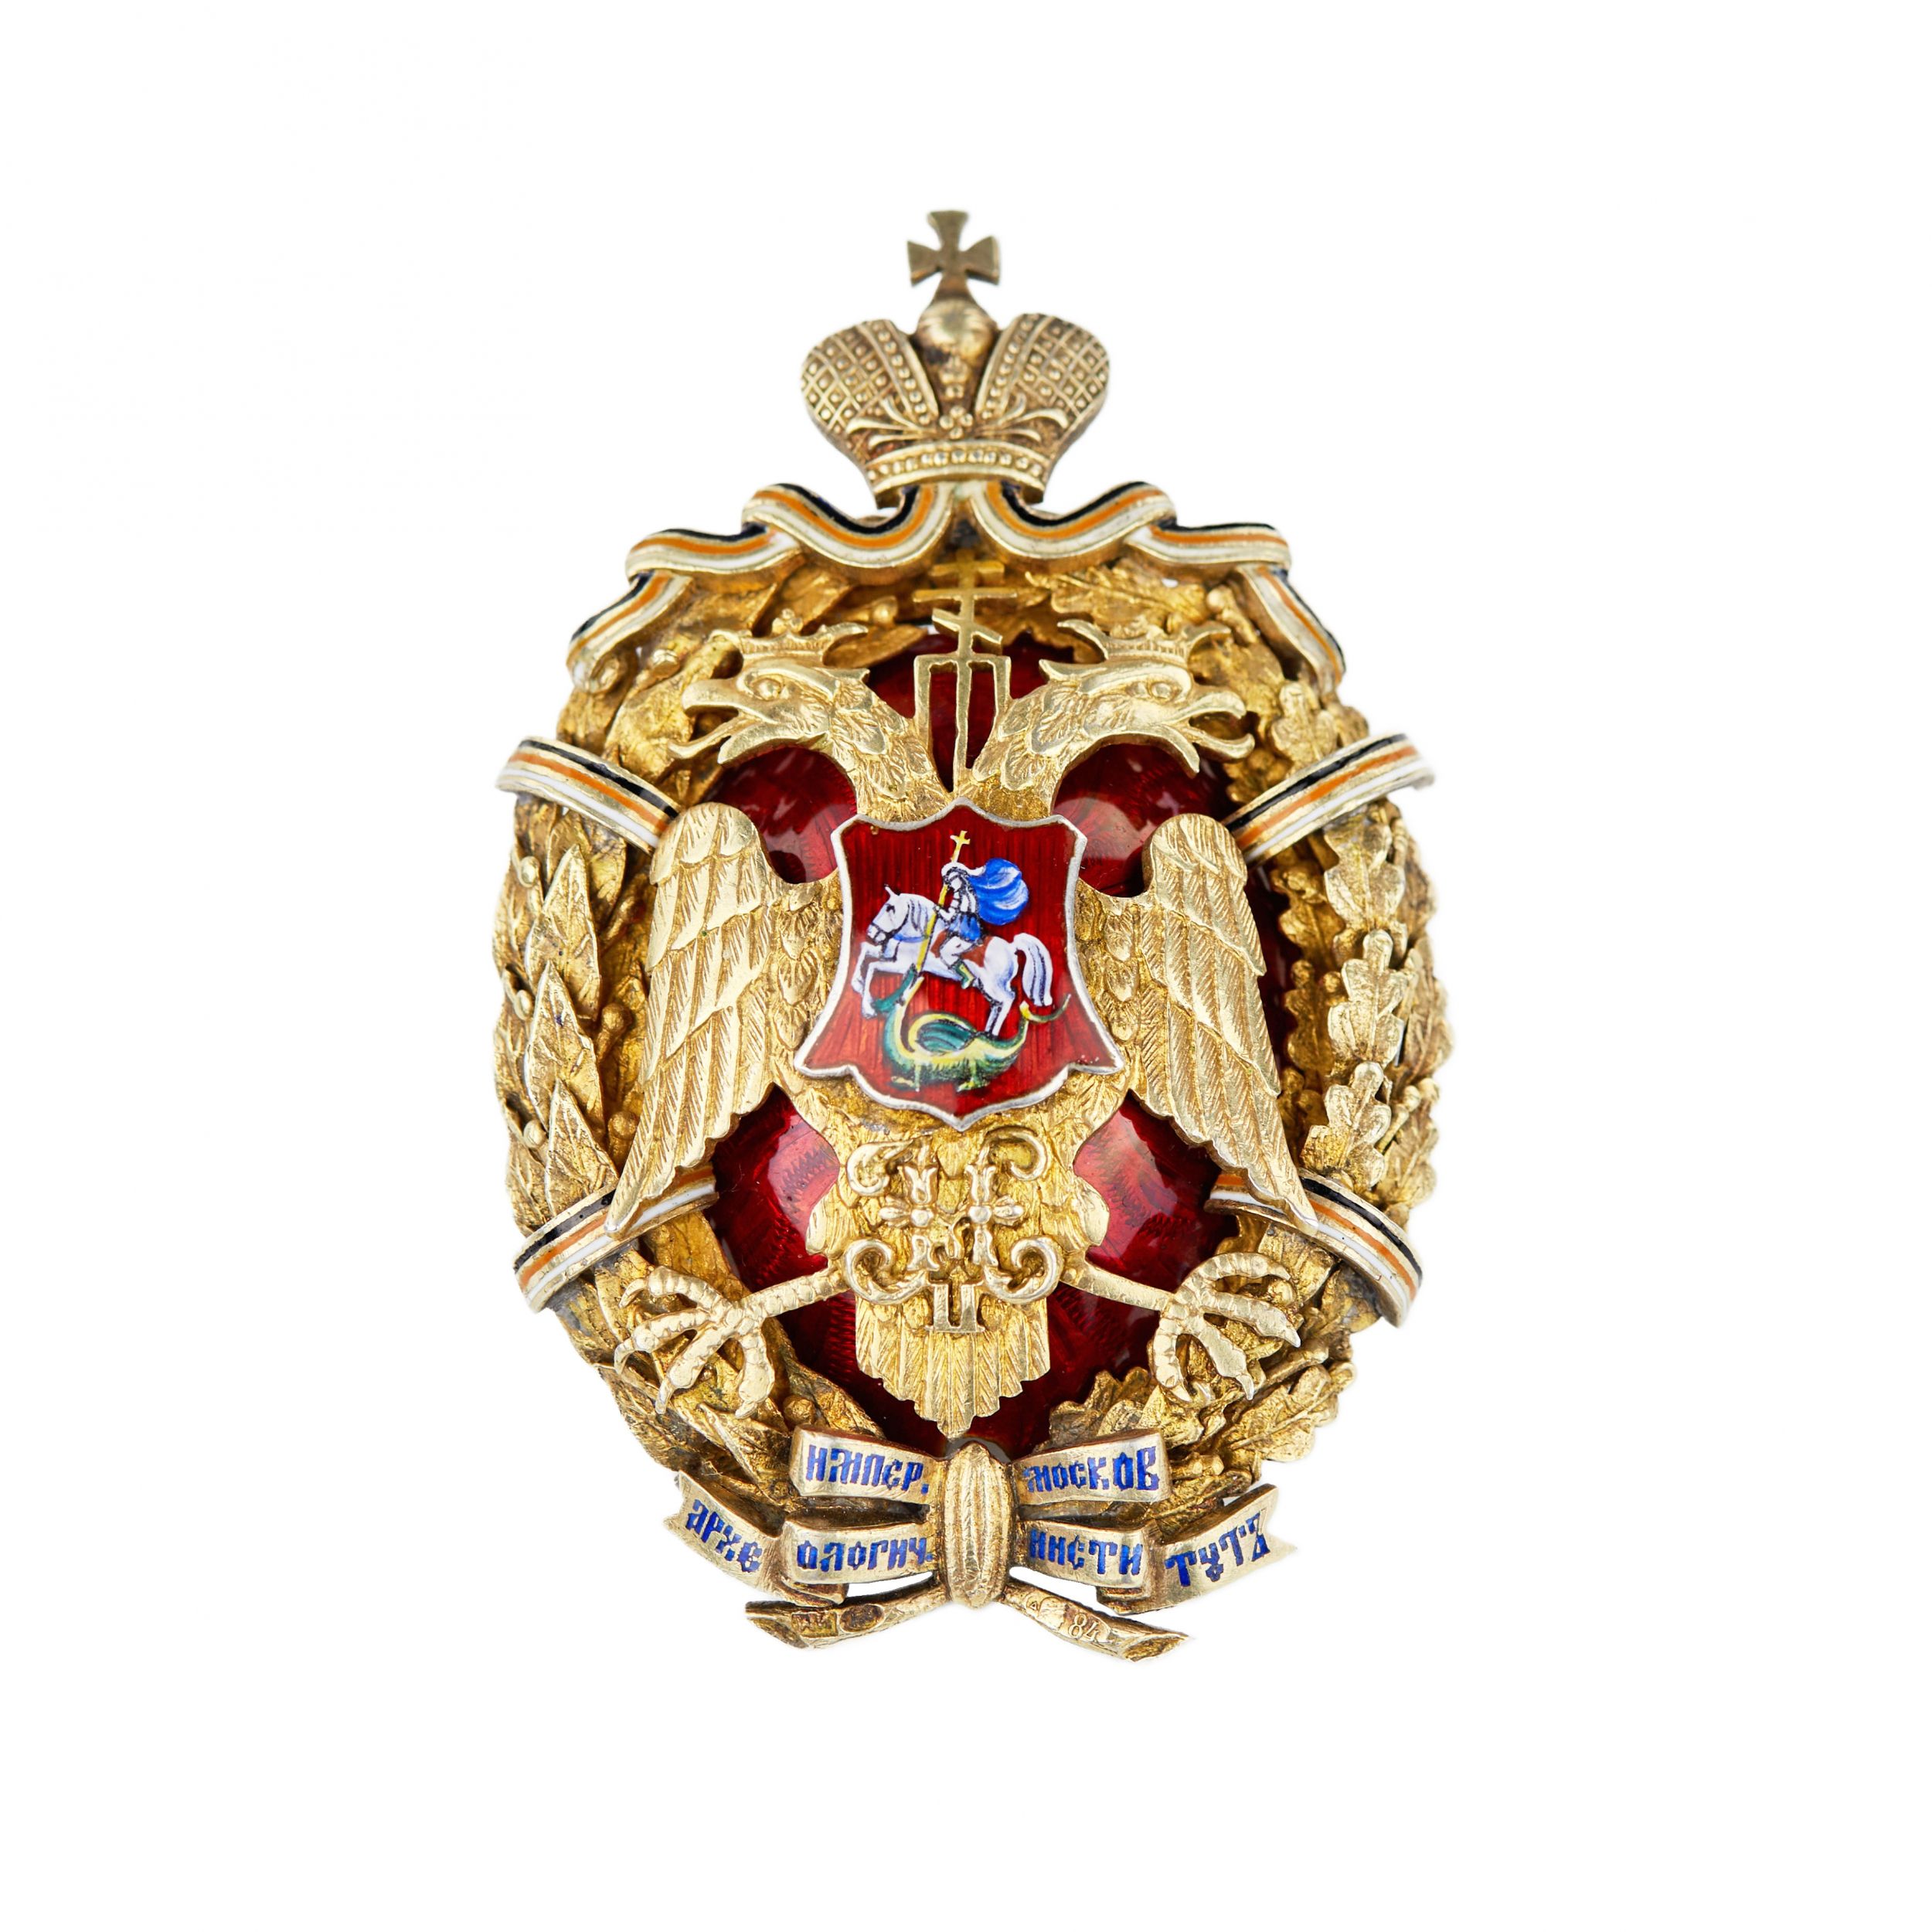 Sign-for-full-members-of-the-Imperial-Moscow-Archaeological-Institute-St-Petersburg-Silver-